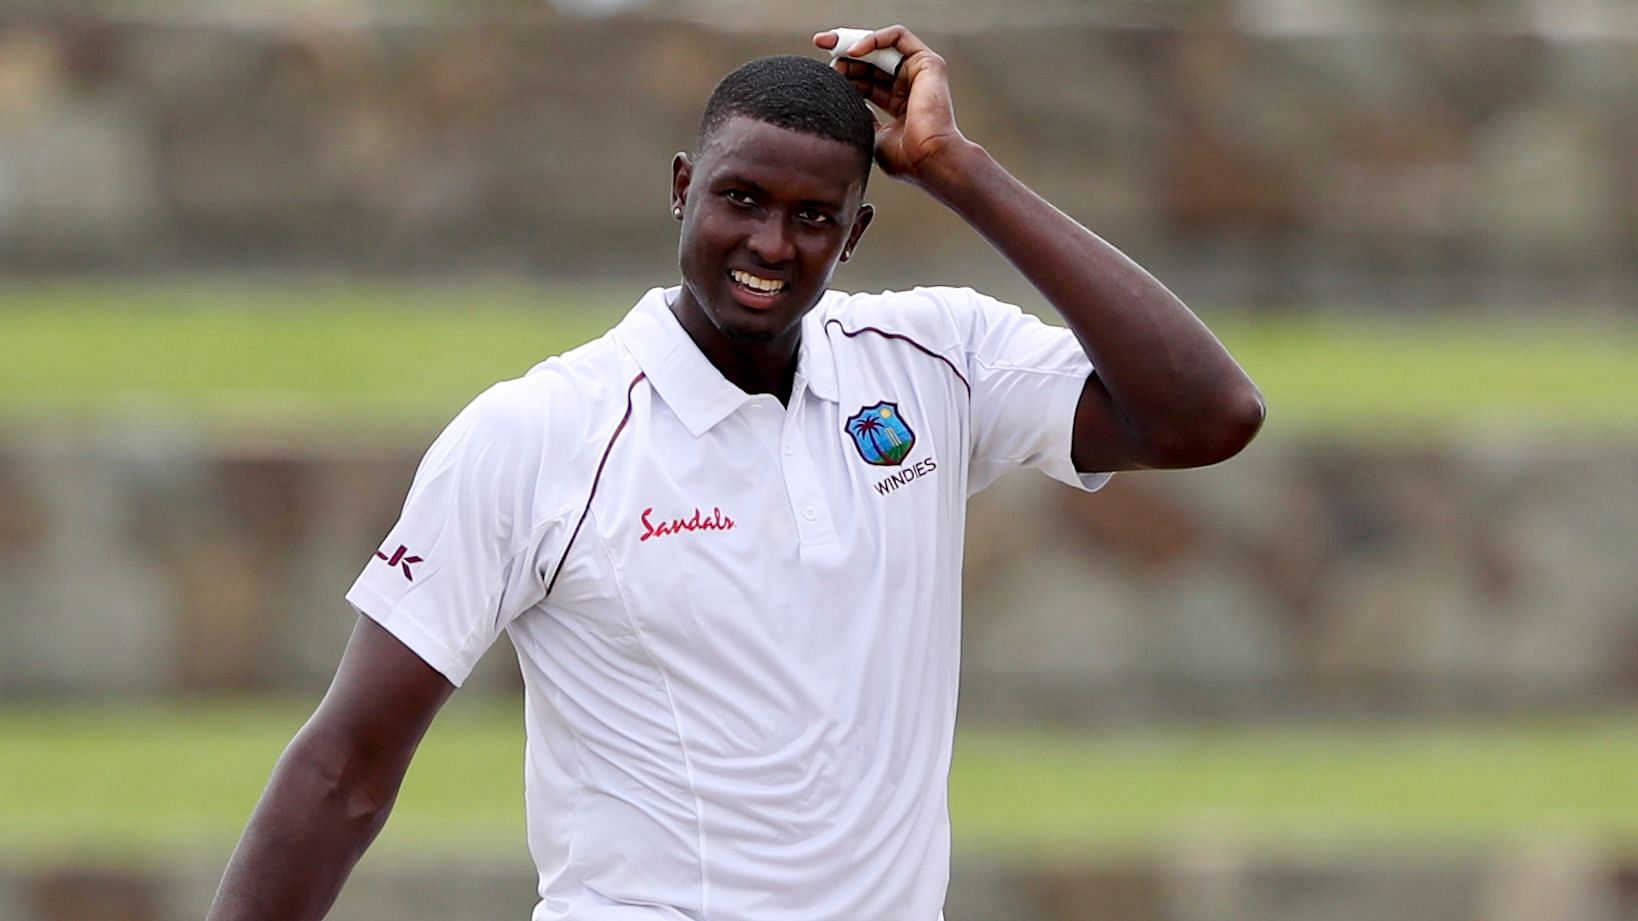 A 318-run loss followed by a 257-run loss – Jason Holder-led West Indies were no match to India in the two-match Test series.